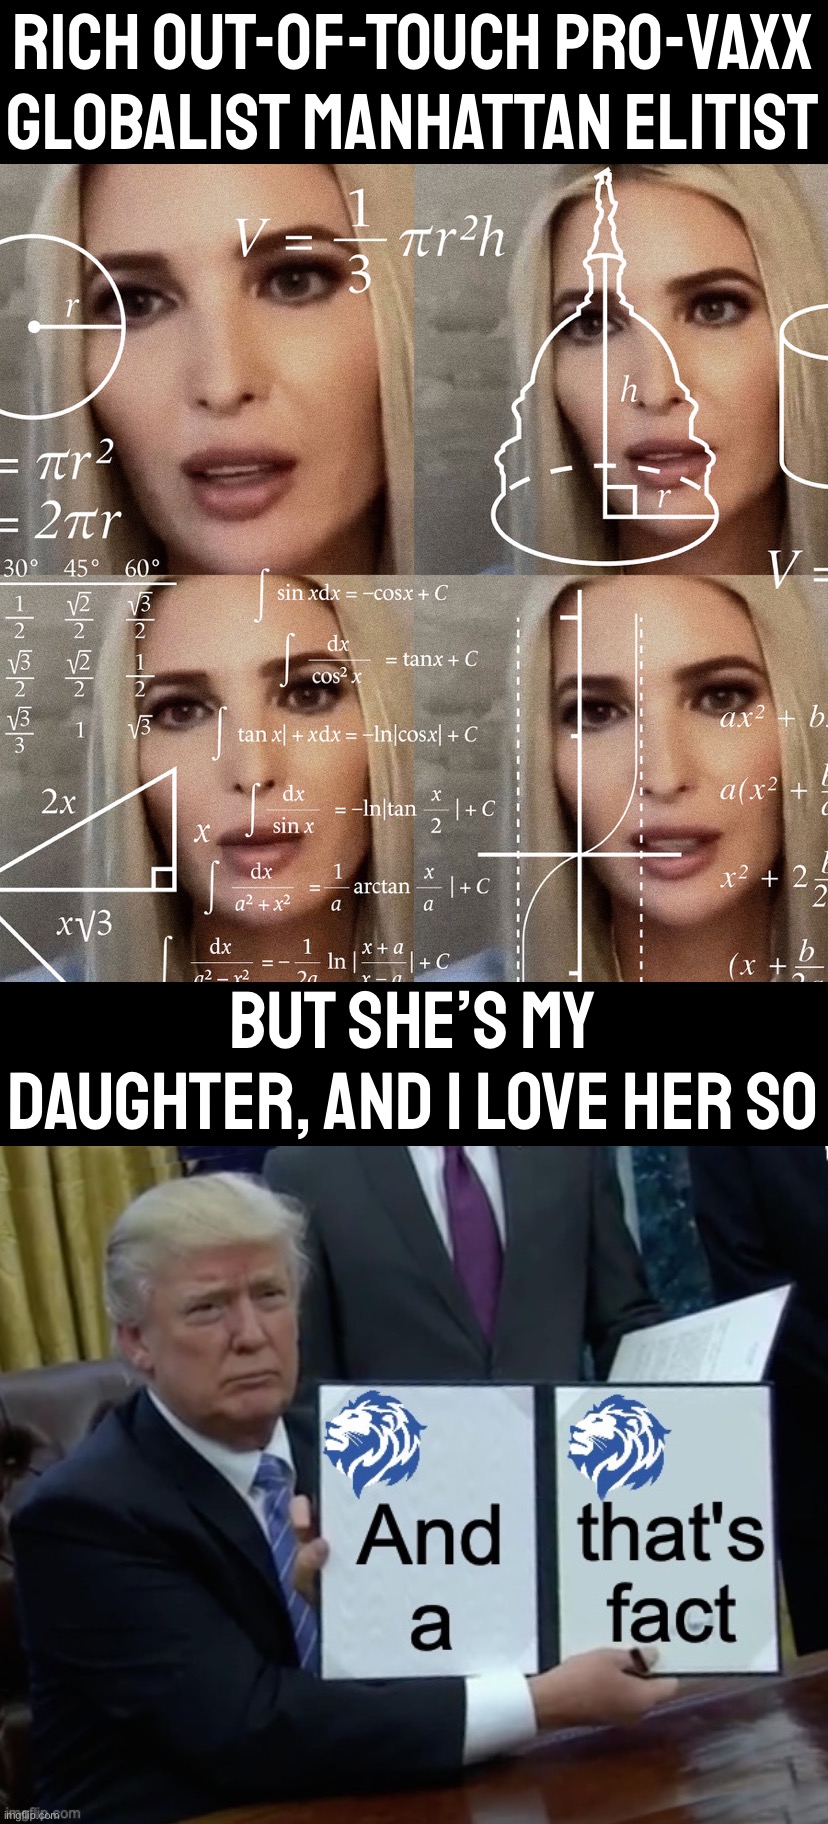 FAMILY IS EVERYTHING. WE HAVE SO MUCH LOVE WHEN THEY ARE LOYAL AND EARN OUR RESPECT. #FAMILY #TRUMP2024 #WINWITHUS #ORWATCHUSWIN | RICH OUT-OF-TOUCH PRO-VAXX GLOBALIST MANHATTAN ELITIST; BUT SHE’S MY DAUGHTER, AND I LOVE HER SO | image tagged in calculating ivanka trump,donald trump conservative party and that s a fact | made w/ Imgflip meme maker